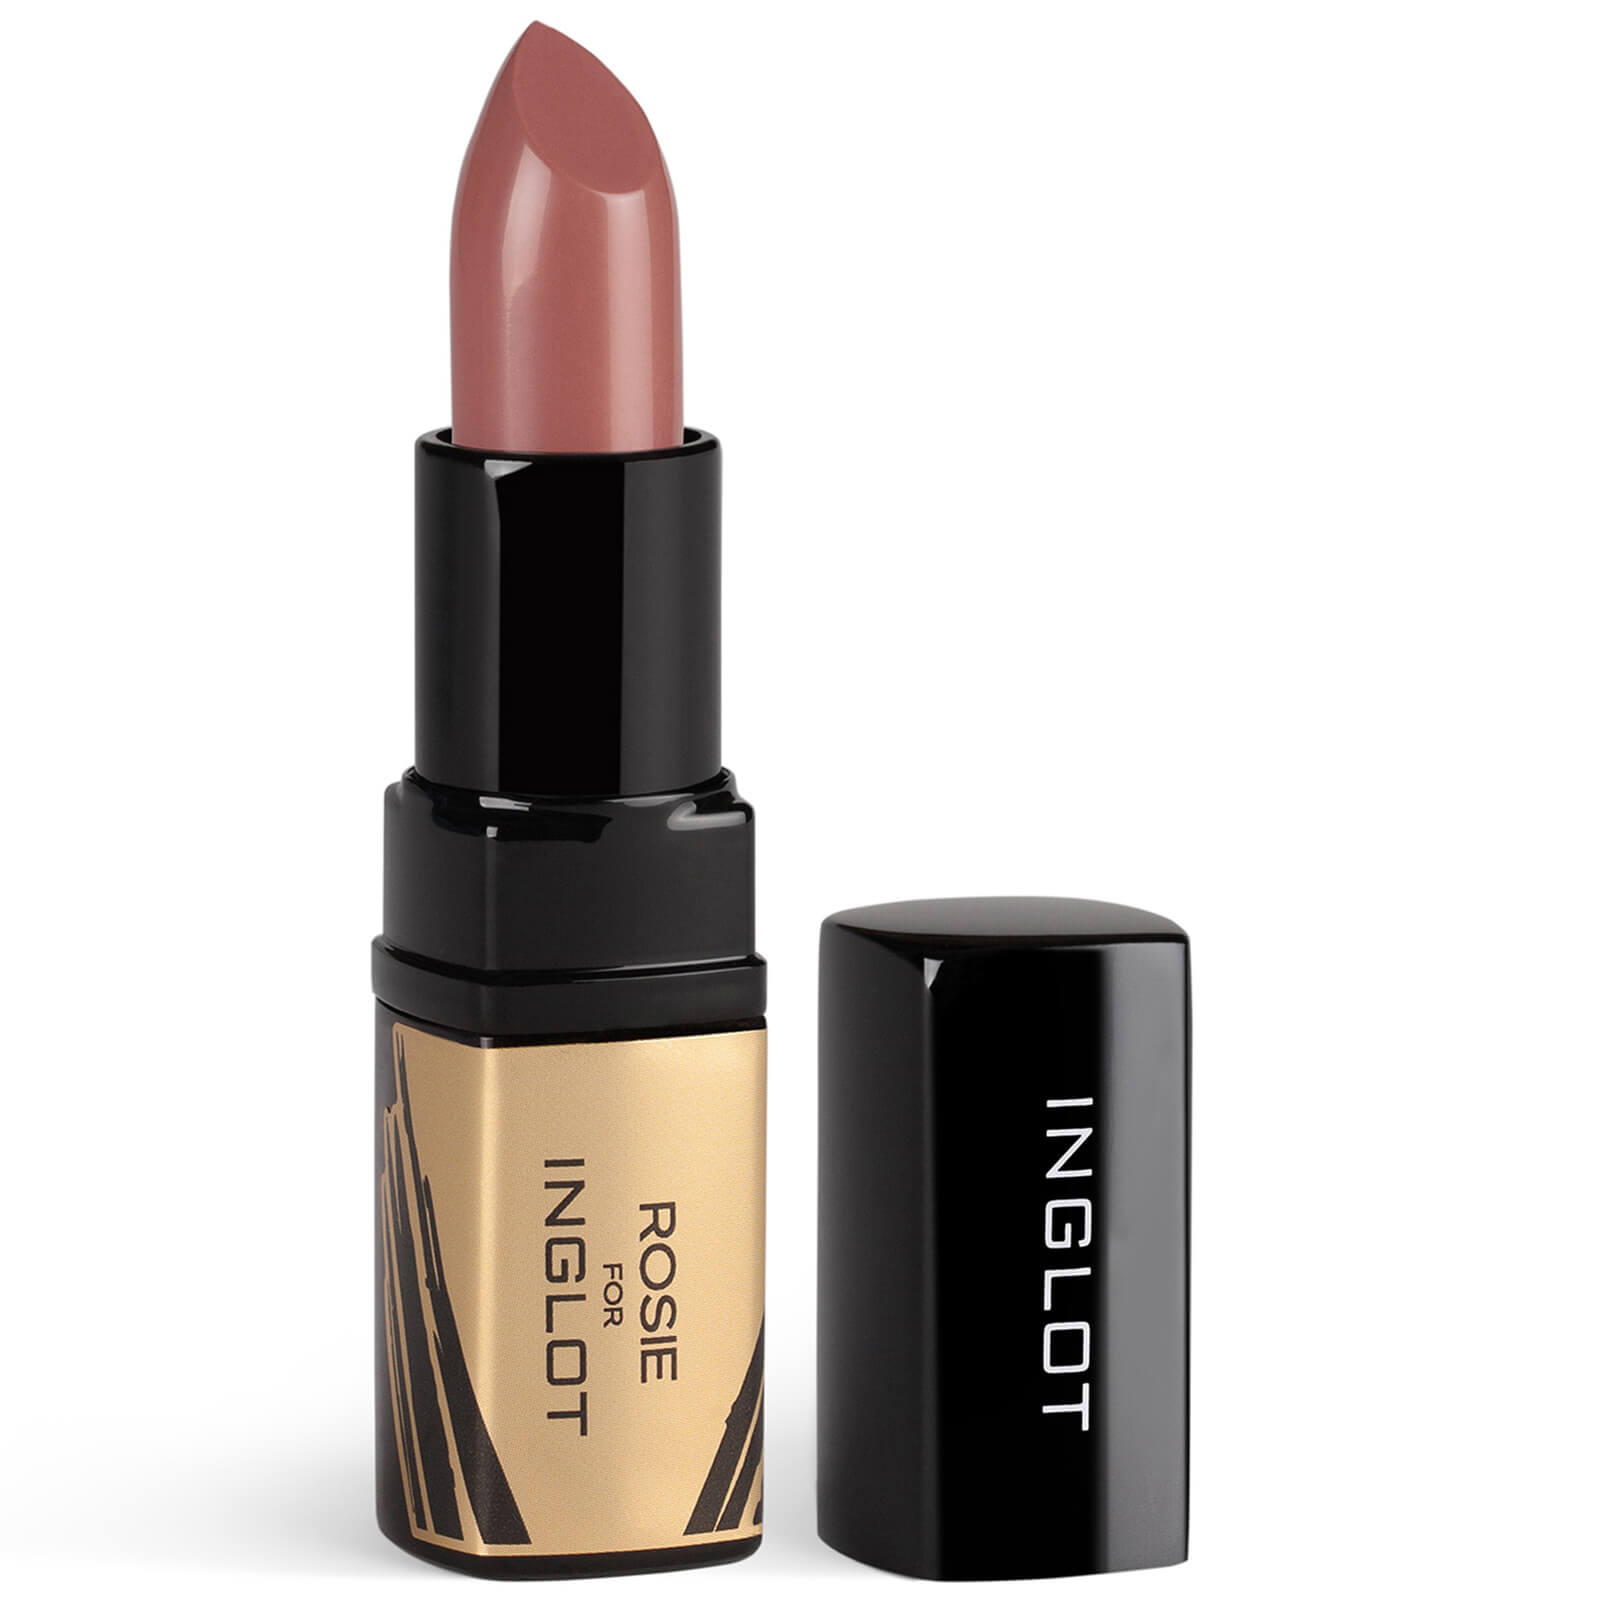 Inglot Rosie for Inglot Dreamy Creamy Lipstick 4g (Various Shades) - Dreamy Nude